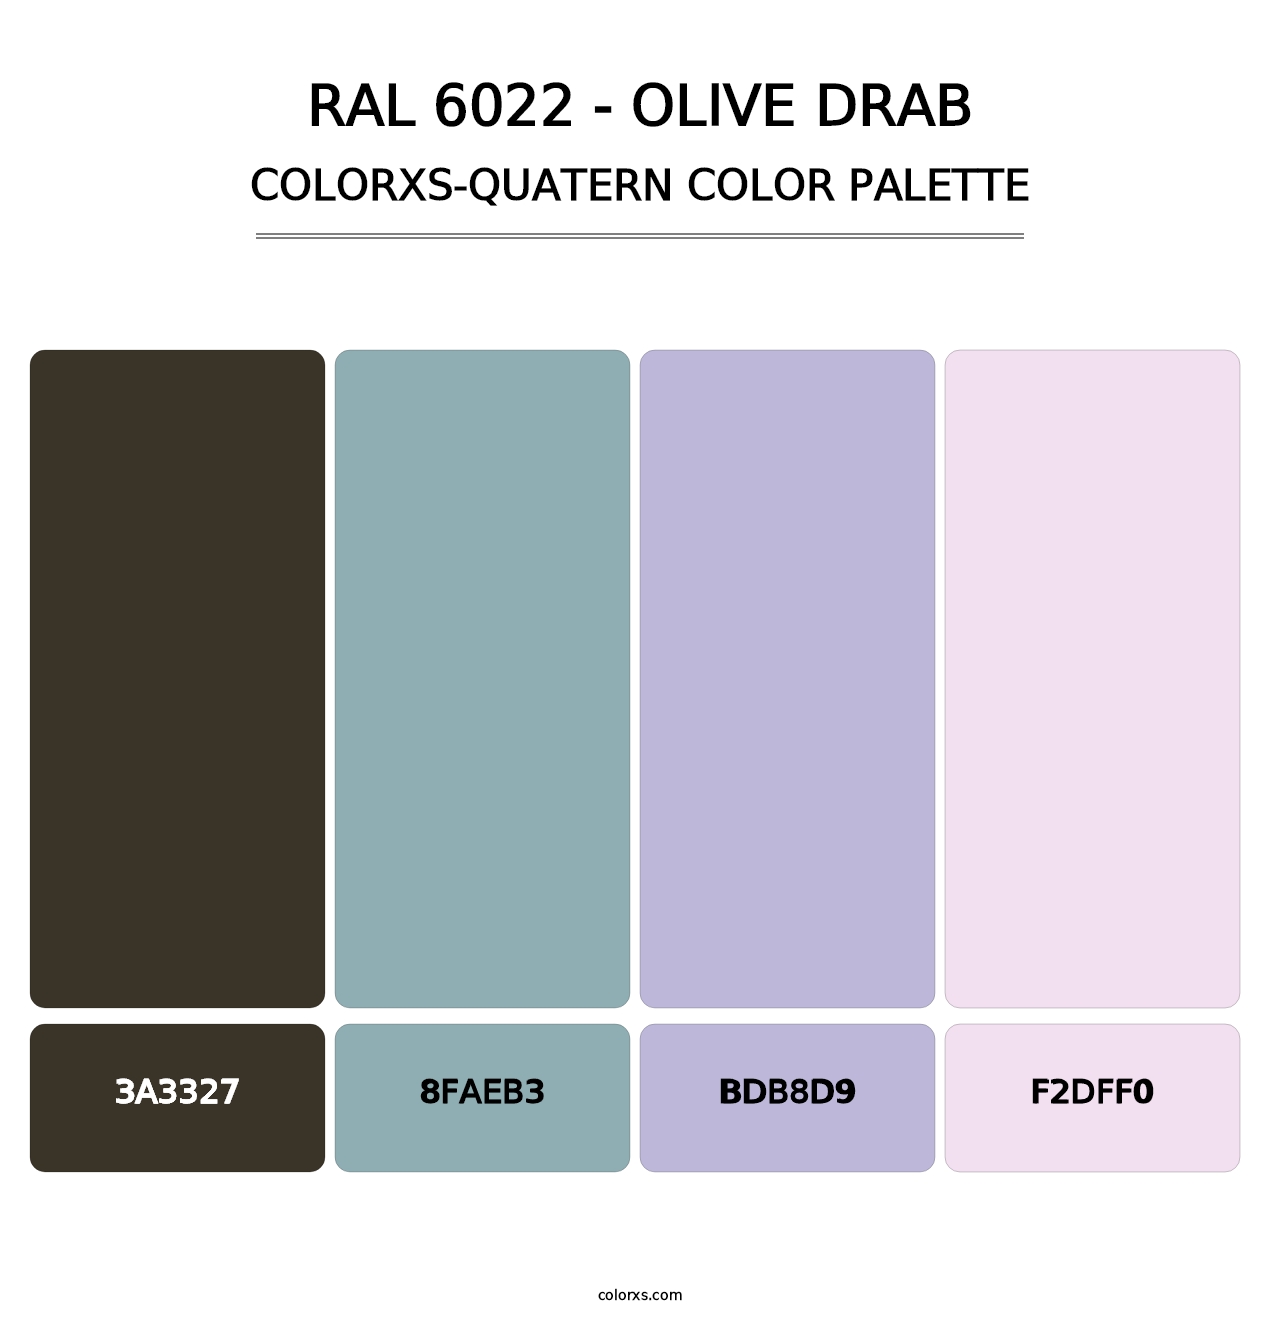 RAL 6022 - Olive Drab - Colorxs Quatern Palette